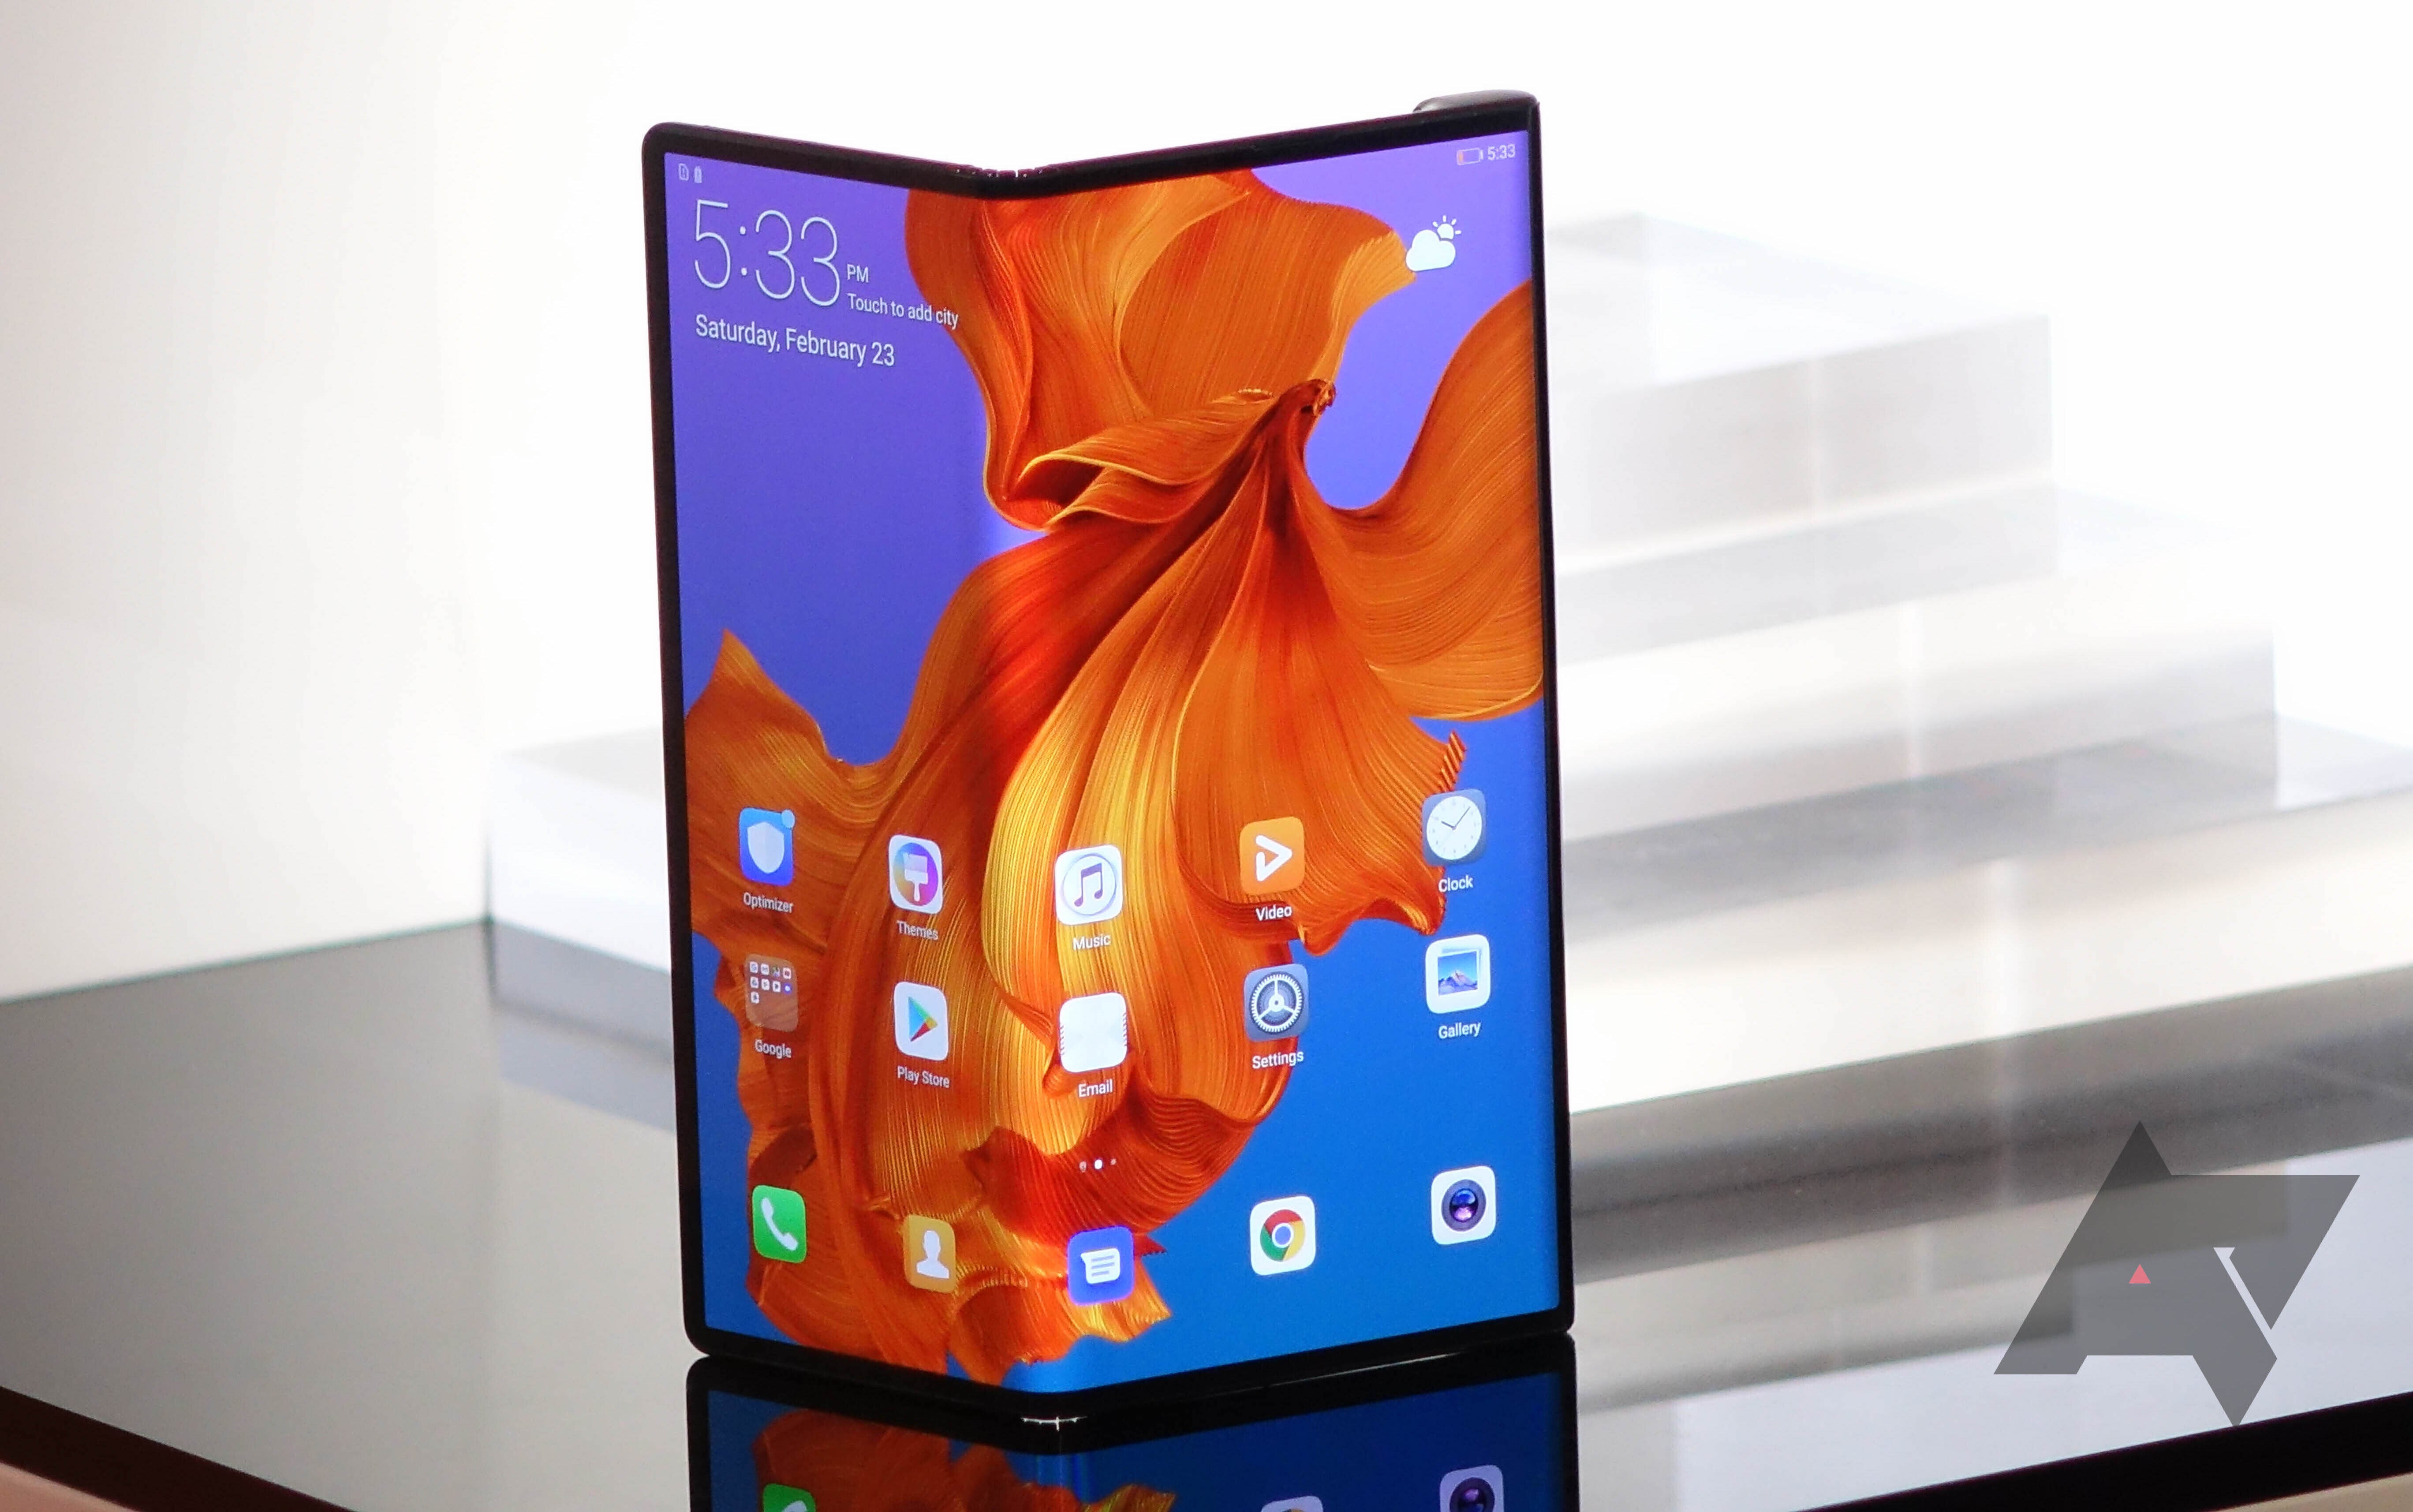 The foldable Huawei Mate X could launch soon, but might not be shipped outside of China - Despite U.S. supply chain ban, Huawei continues to grow handset shipments